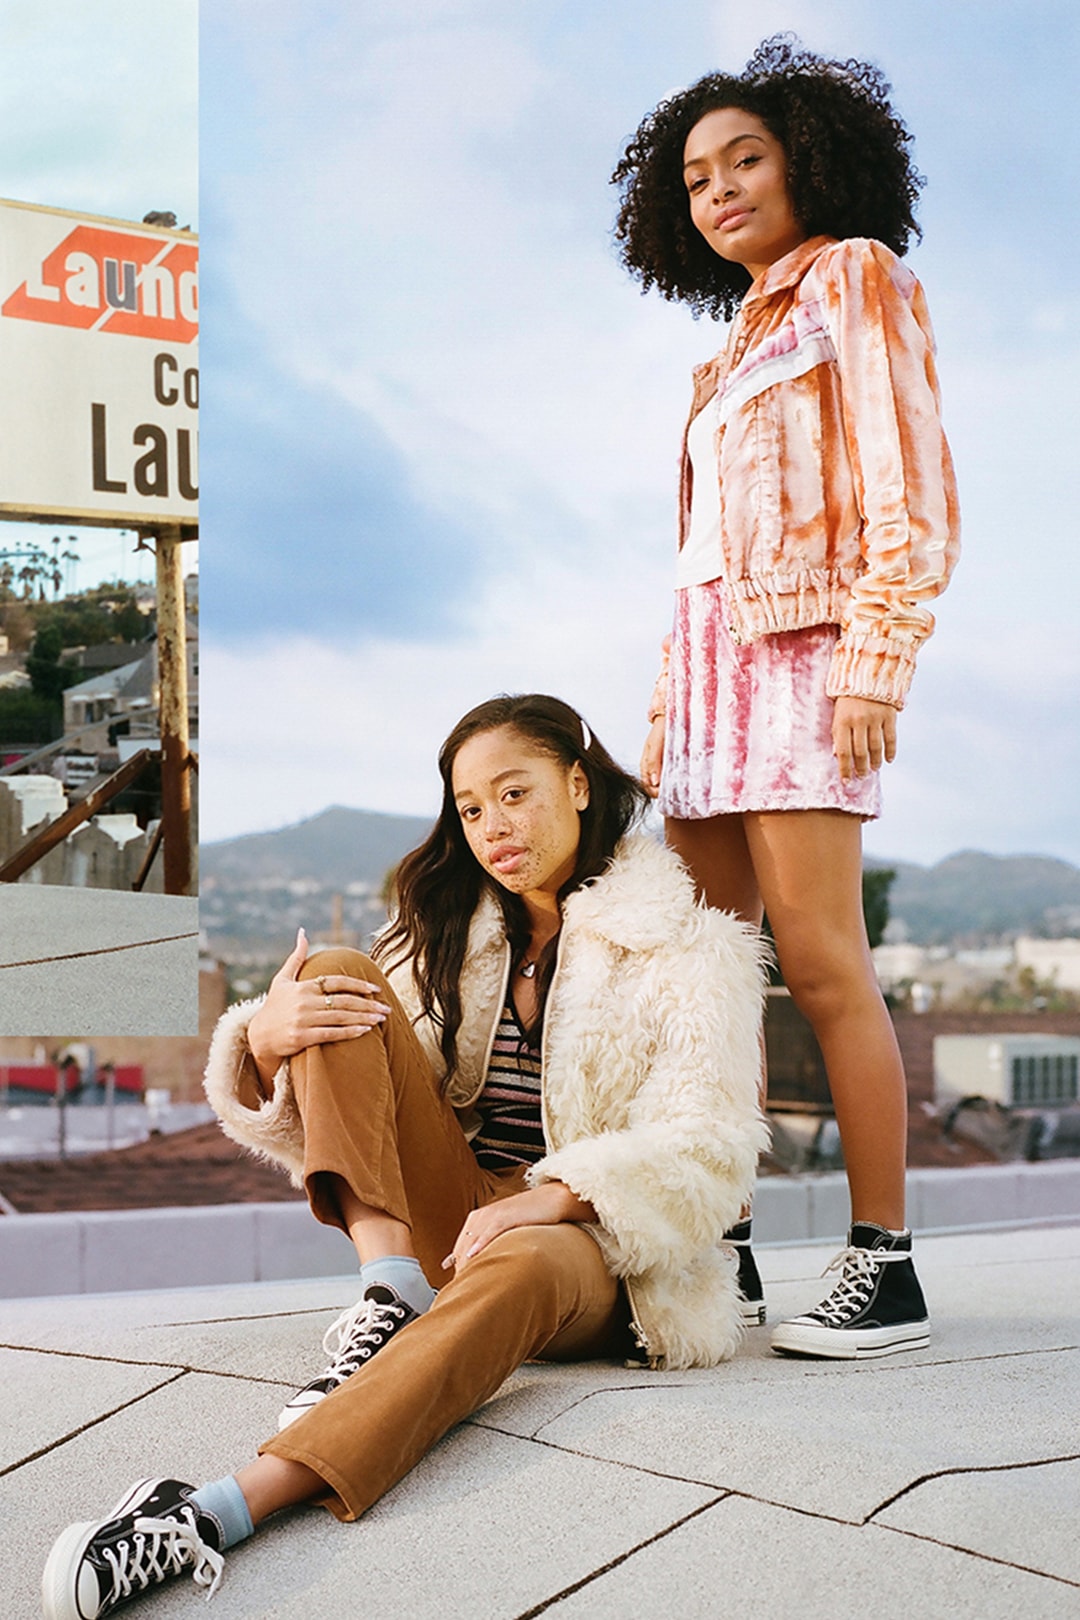 Converse Forever Chuck Social Lookbooks The Throwback Chuck ‘70